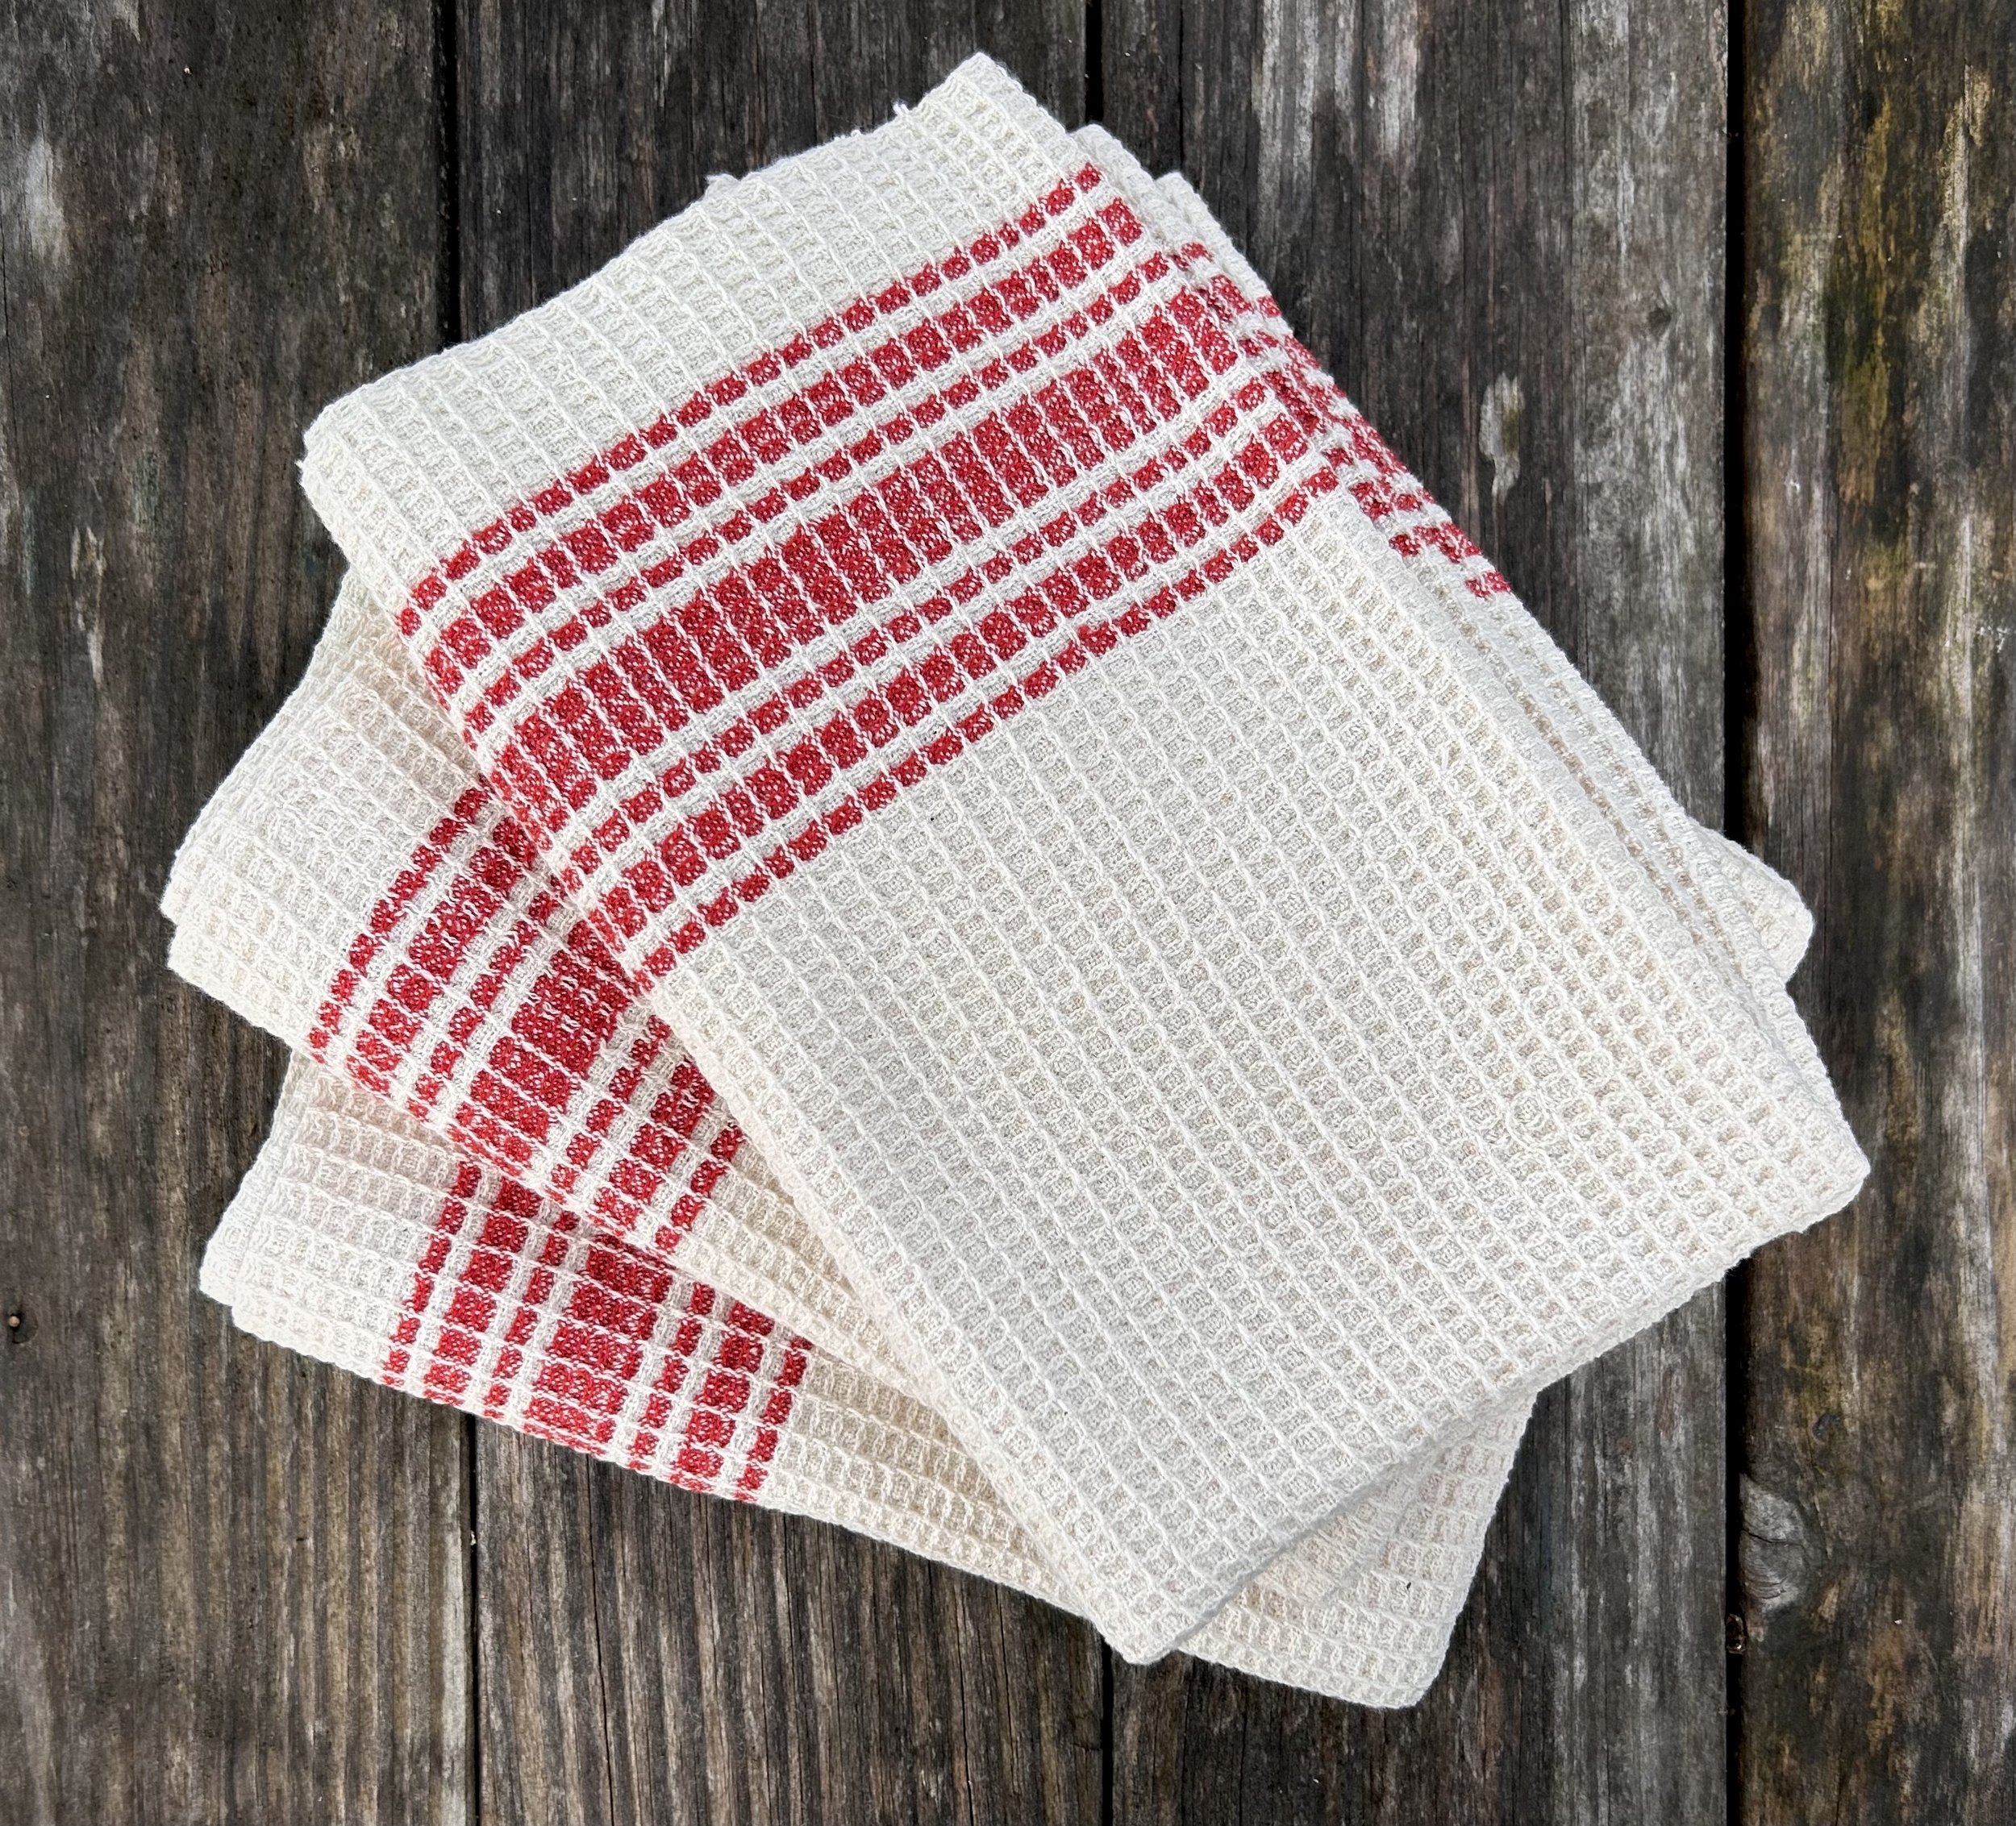  Waffle weave towels, 2023. Unmercerized 8/2 cotton. 22” x 28” each. Woven using a four harness waffle weave draft from Marguerite Davison’s  A Handweaver’s Pattern Book . 